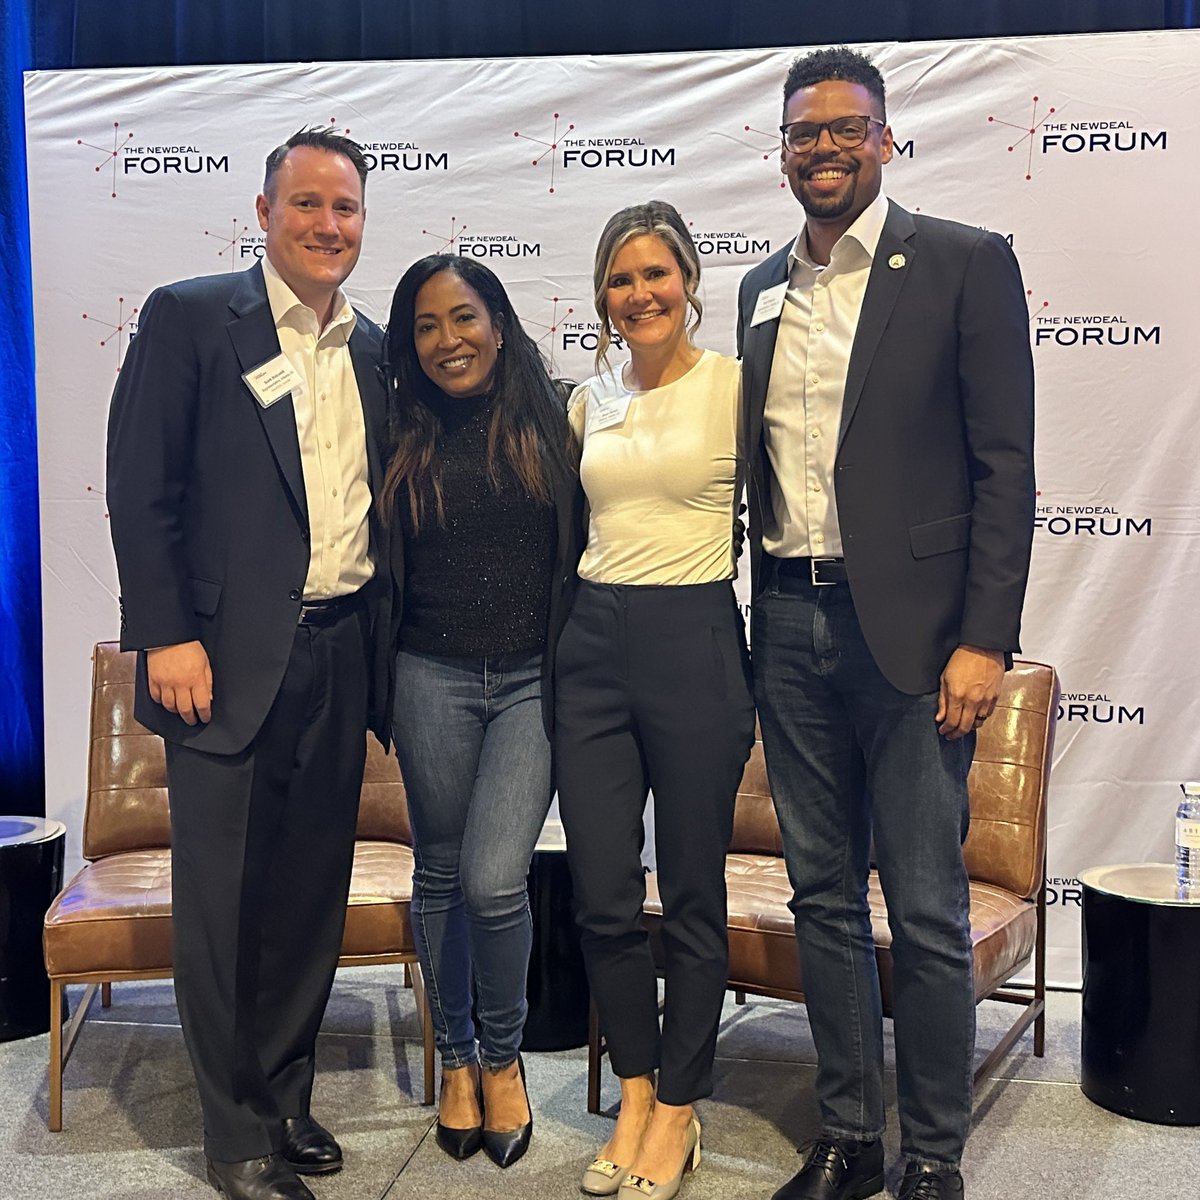 Loved being with my #gapol peeps in Phoenix at the @NewDEALLeaders annual Ideas Summit! 

With these partners, we are prepared for the work ahead.